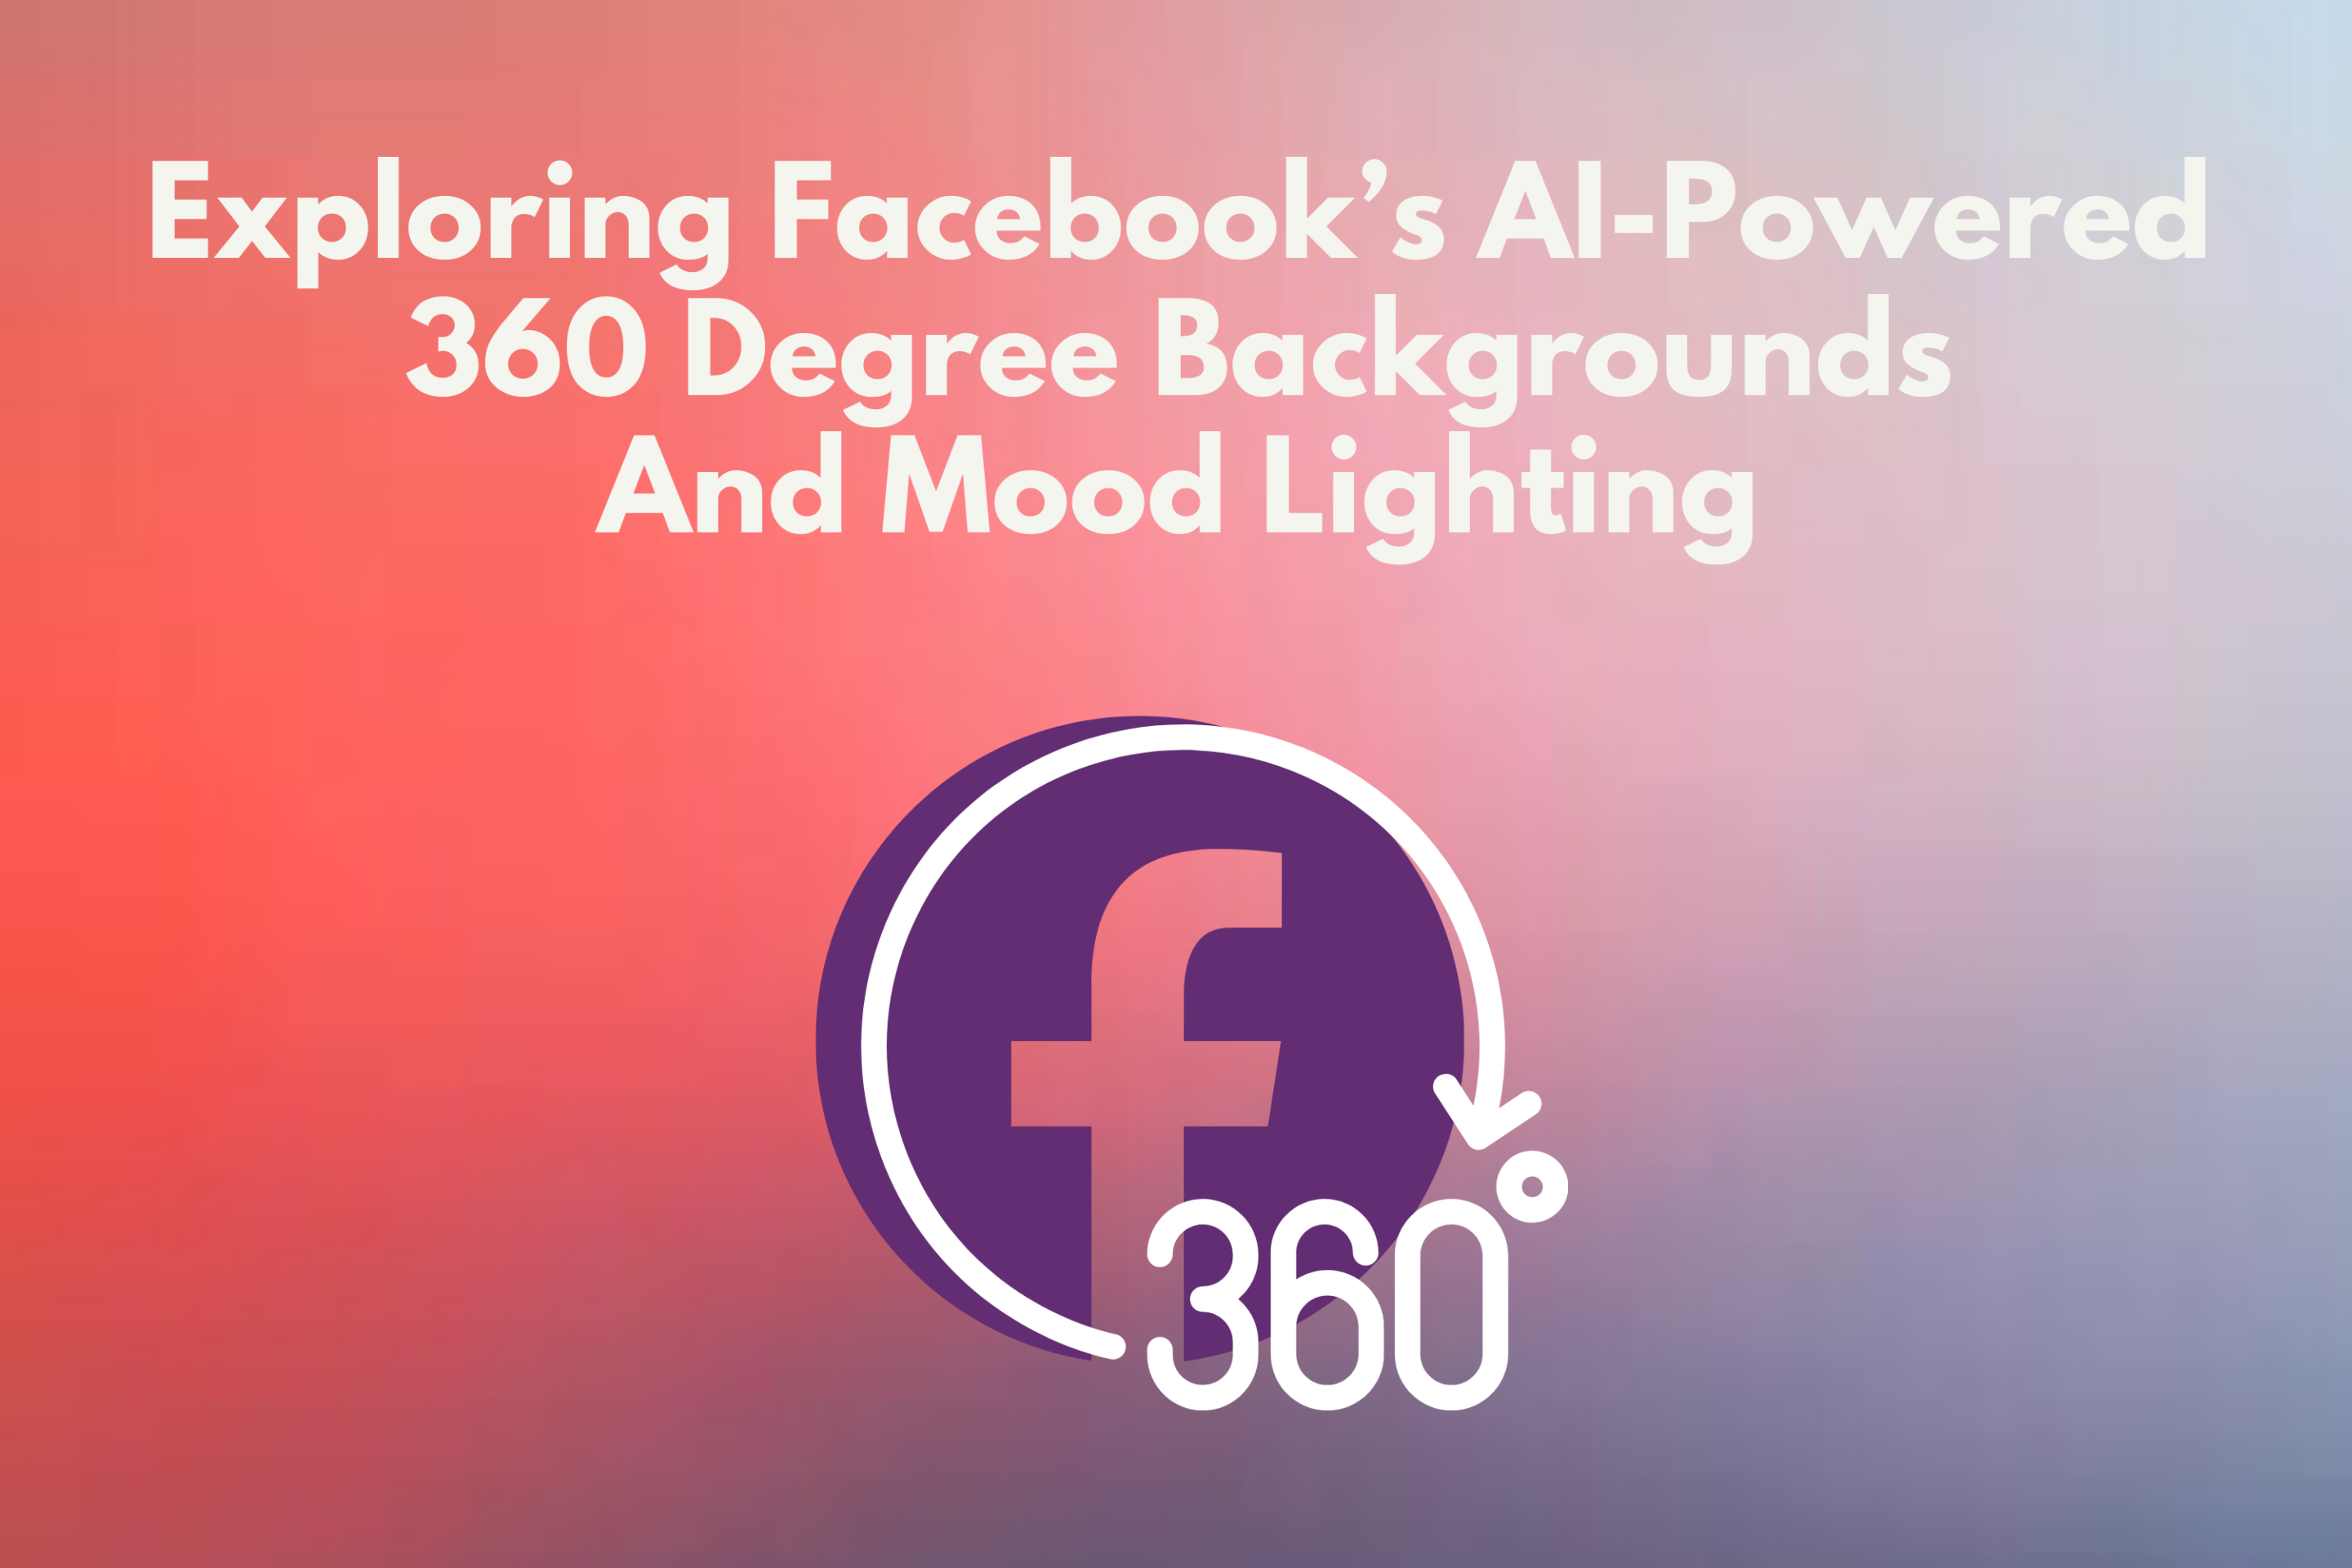 Exploring Facebook’s AI-Powered 360 Degree Backgrounds And Mood Lighting